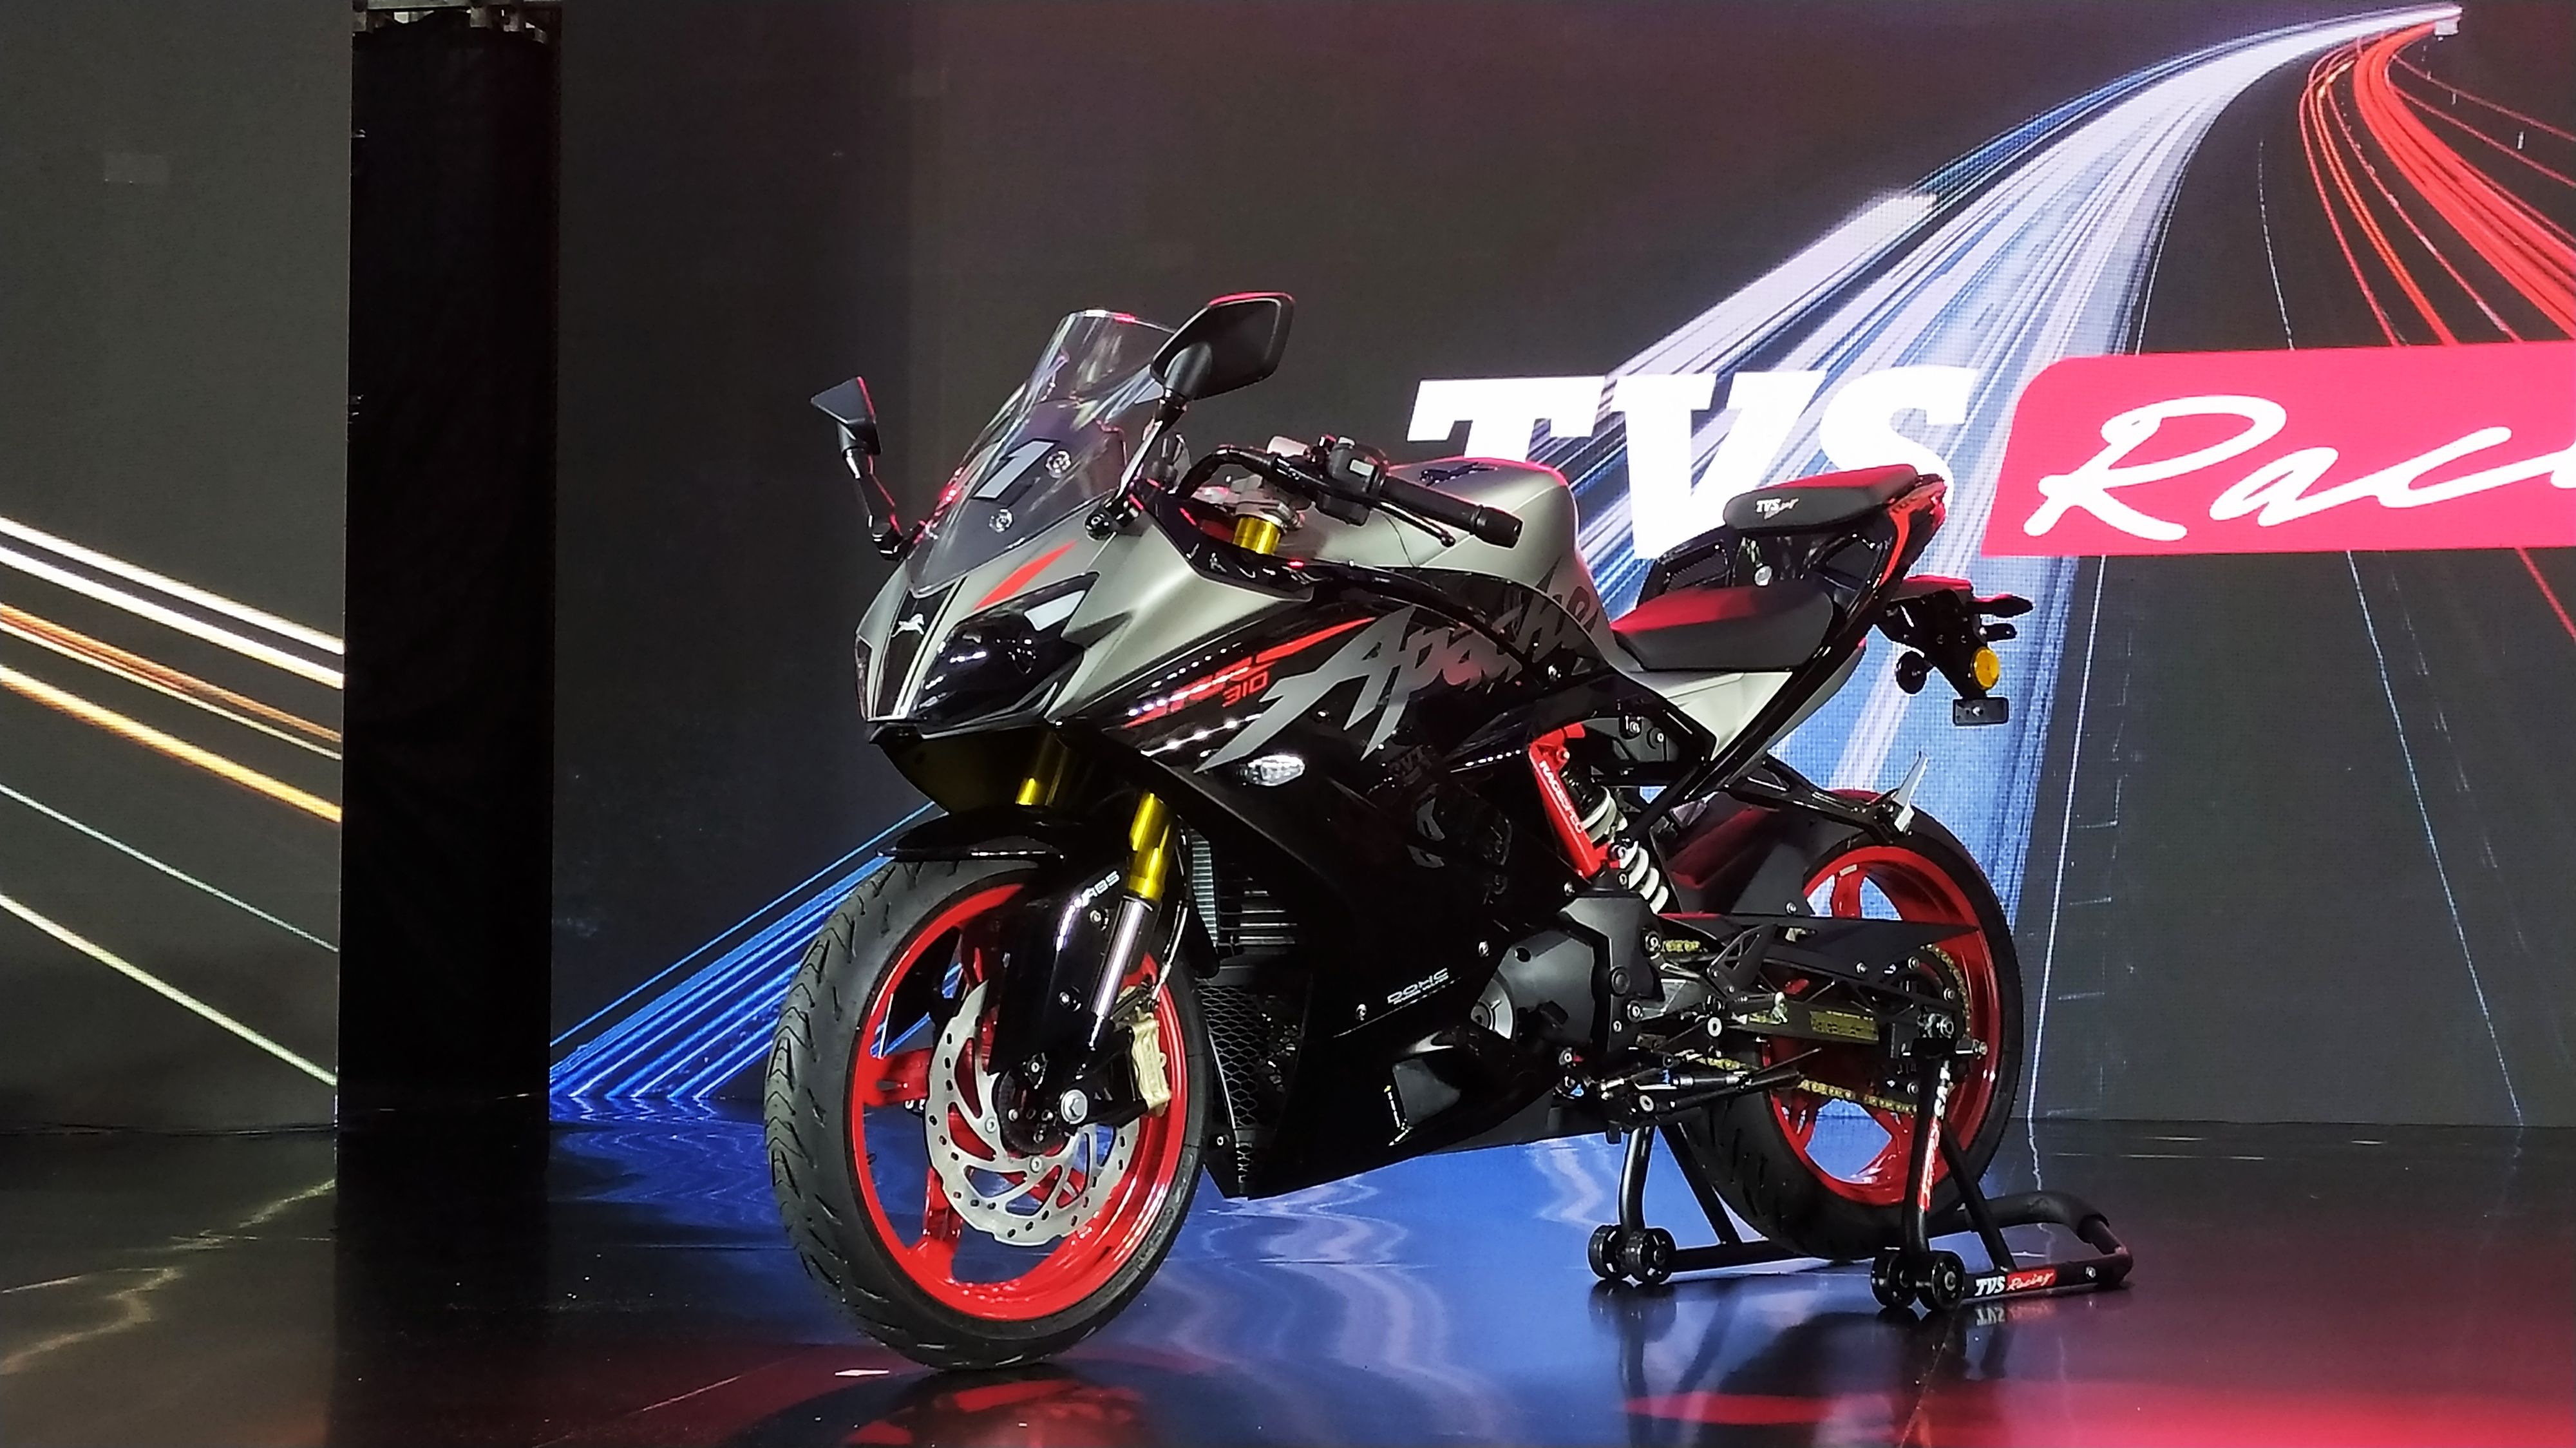 Breaking 2021 Tvs Apache Rr 310 Launched Gets Performance Specific